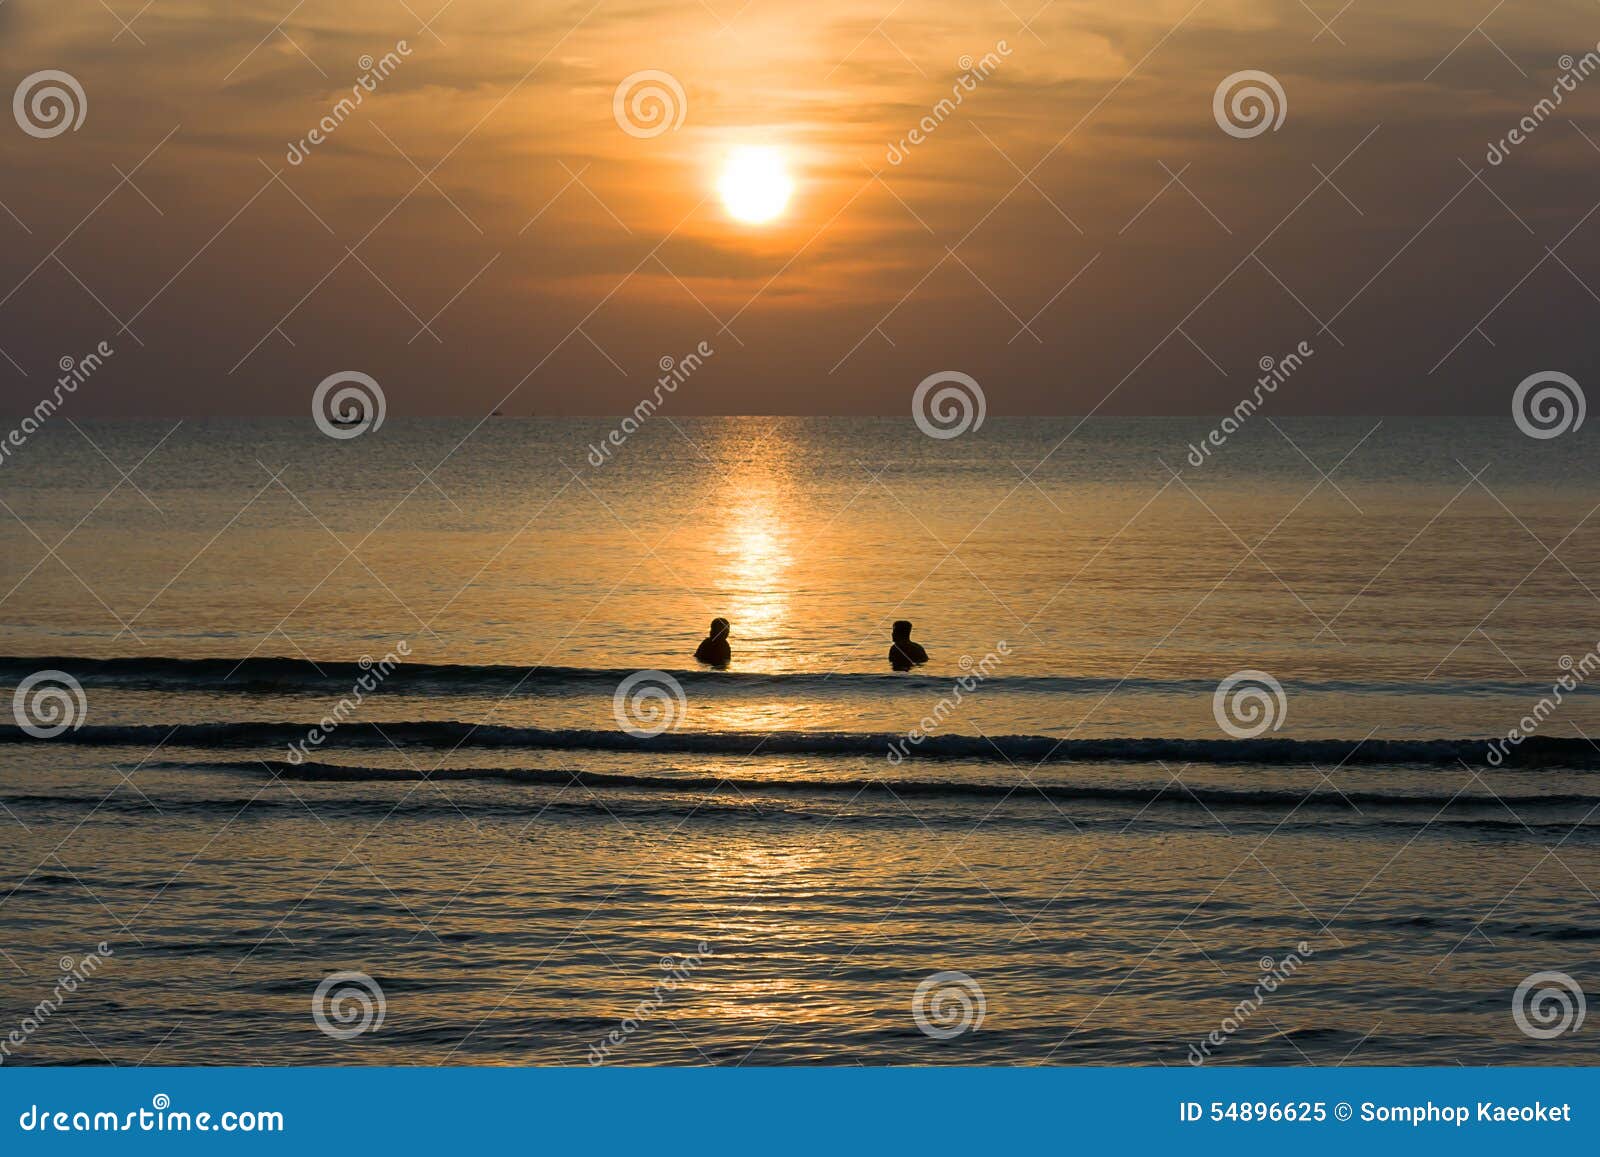 Sunsets at the Sea with Silhouette People in the Water and Clouds and ...